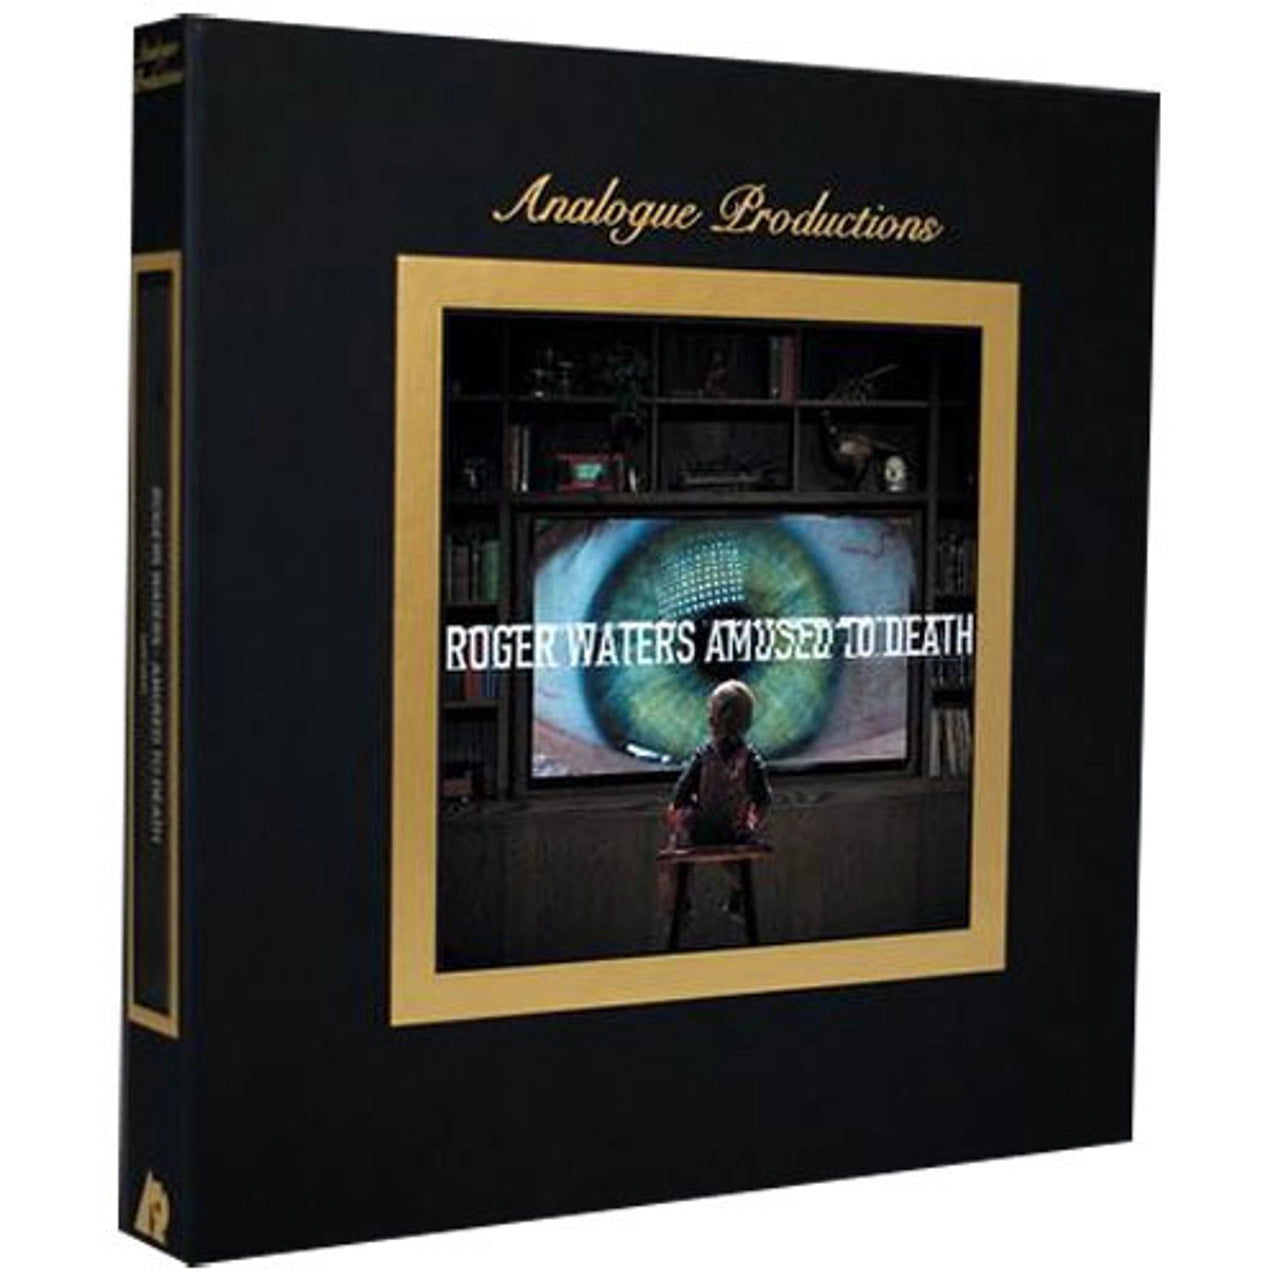 Roger Waters - Amused To Death [4LP Box] Analogue Productions 180 Gram 45RPM Remastered Audiophile Vinyl)